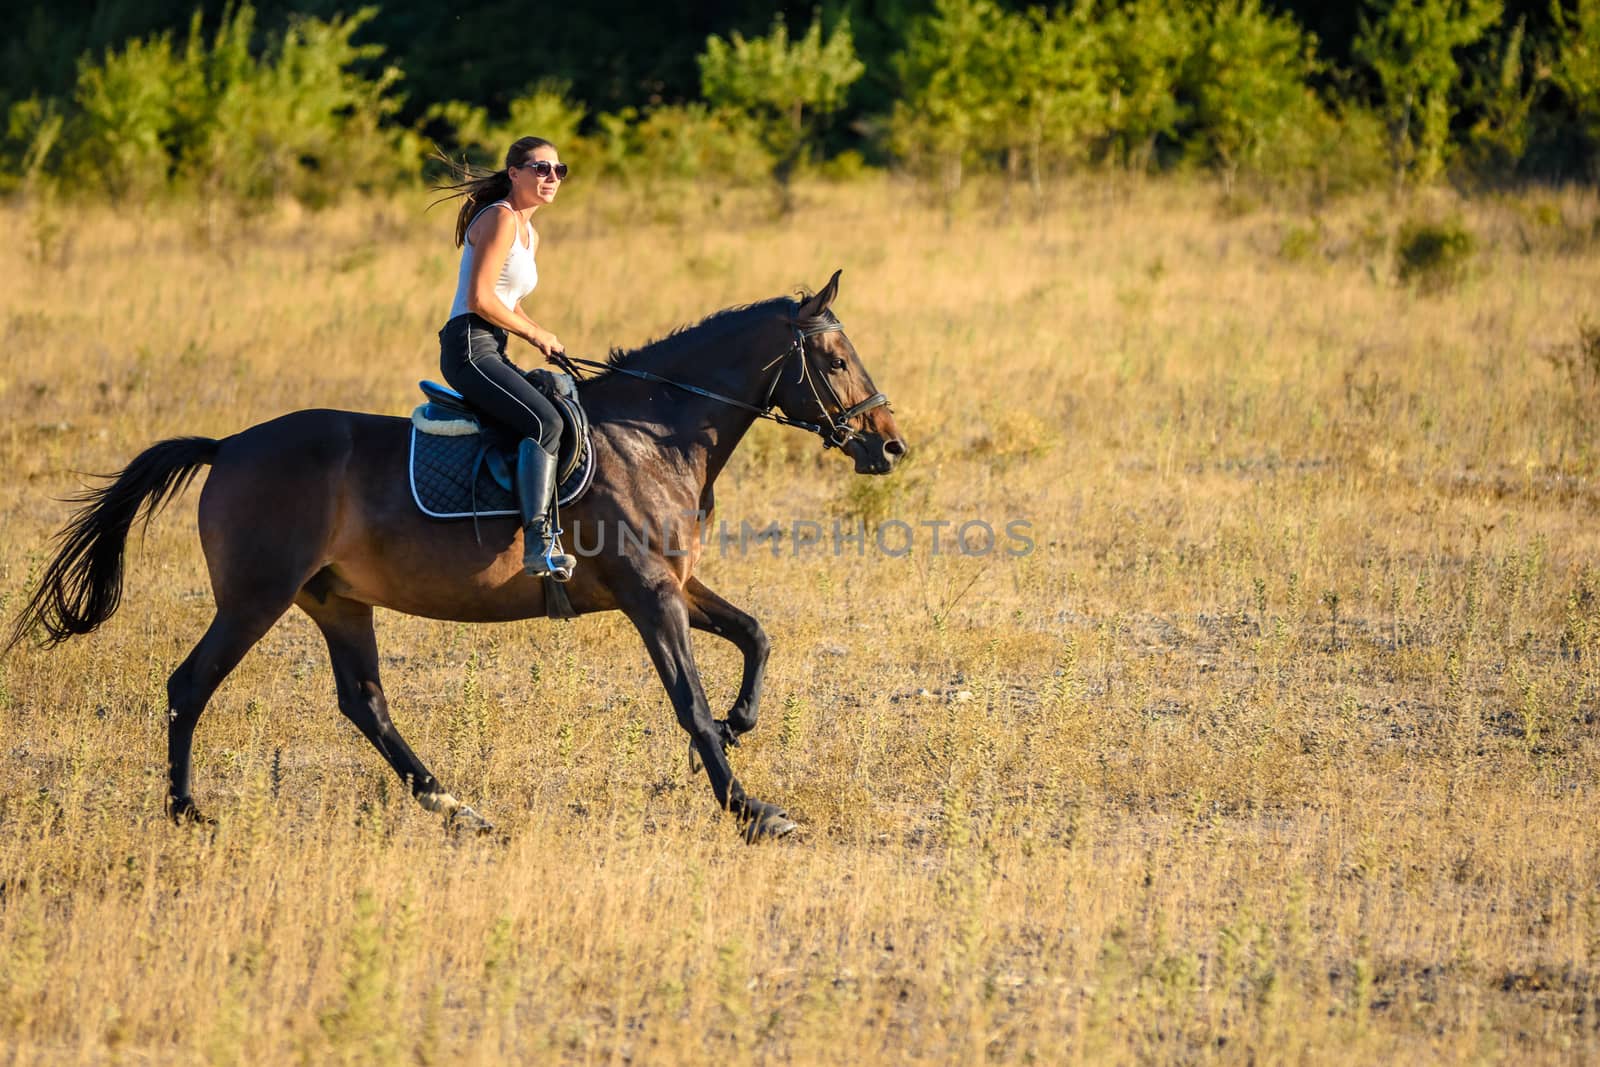 Girl rides a horse across the field on a sunny day by Madhourse